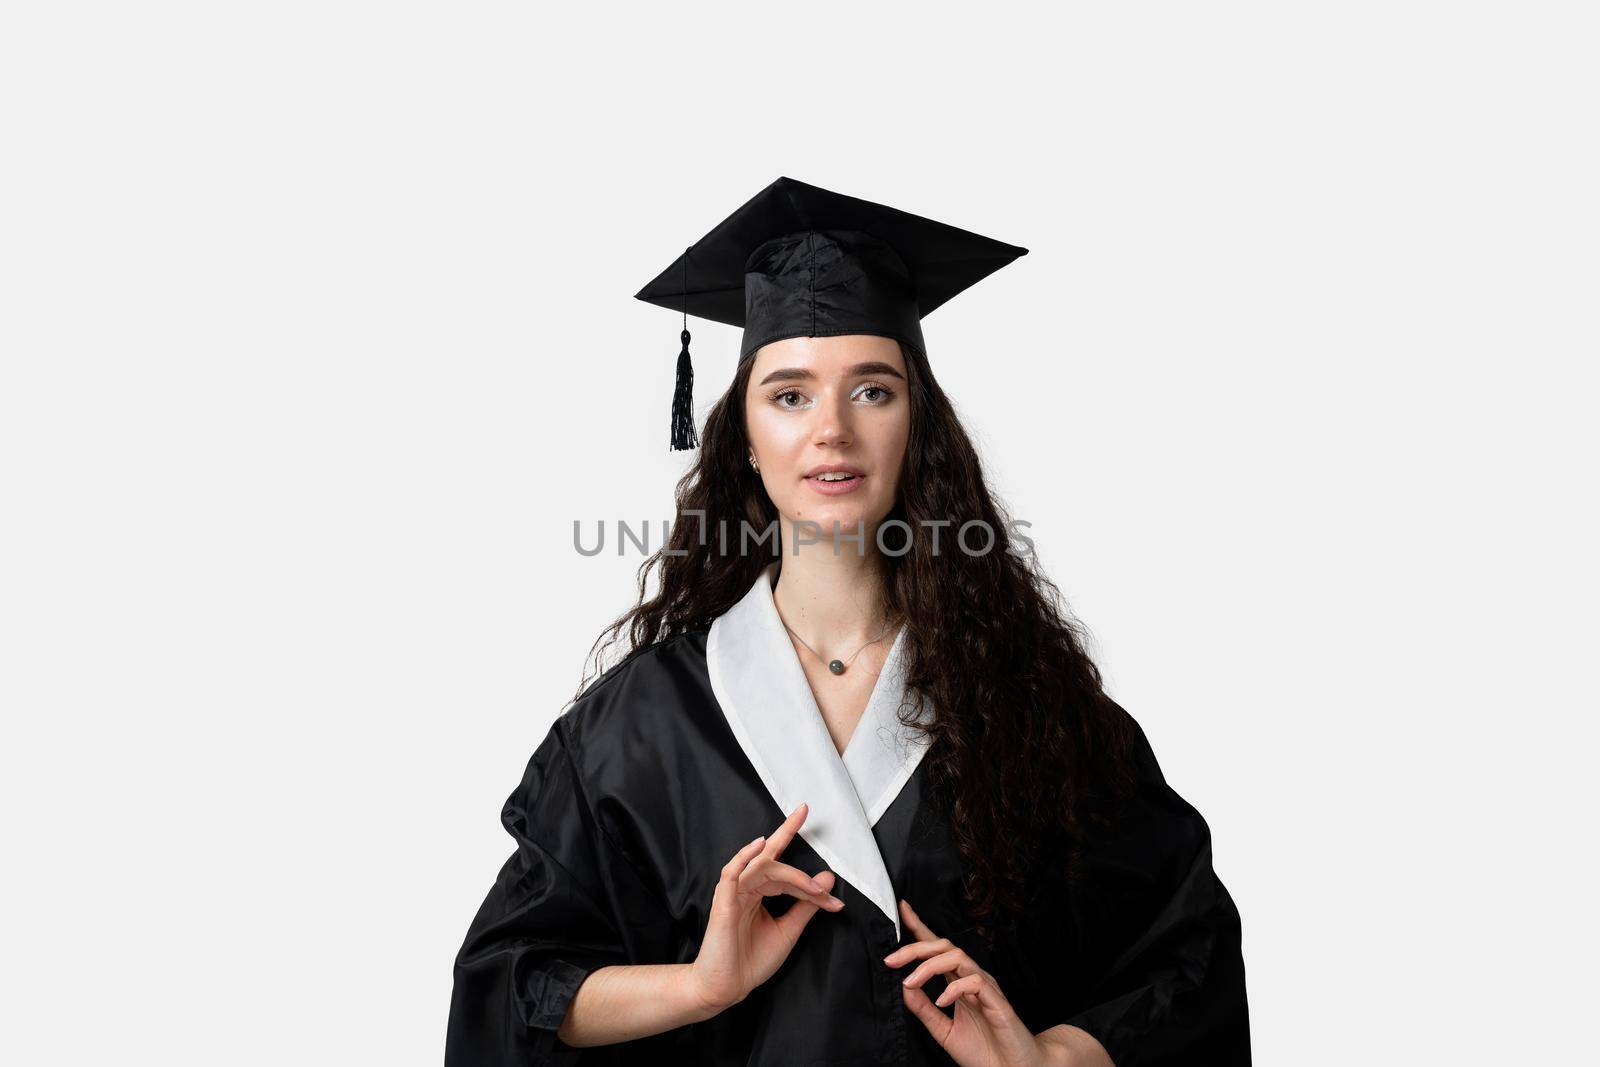 Distance learning online. Study at home. Graduation from college. Graduate in black robe smile on white background. Funny woman smiling after successful finish university and complete master degree